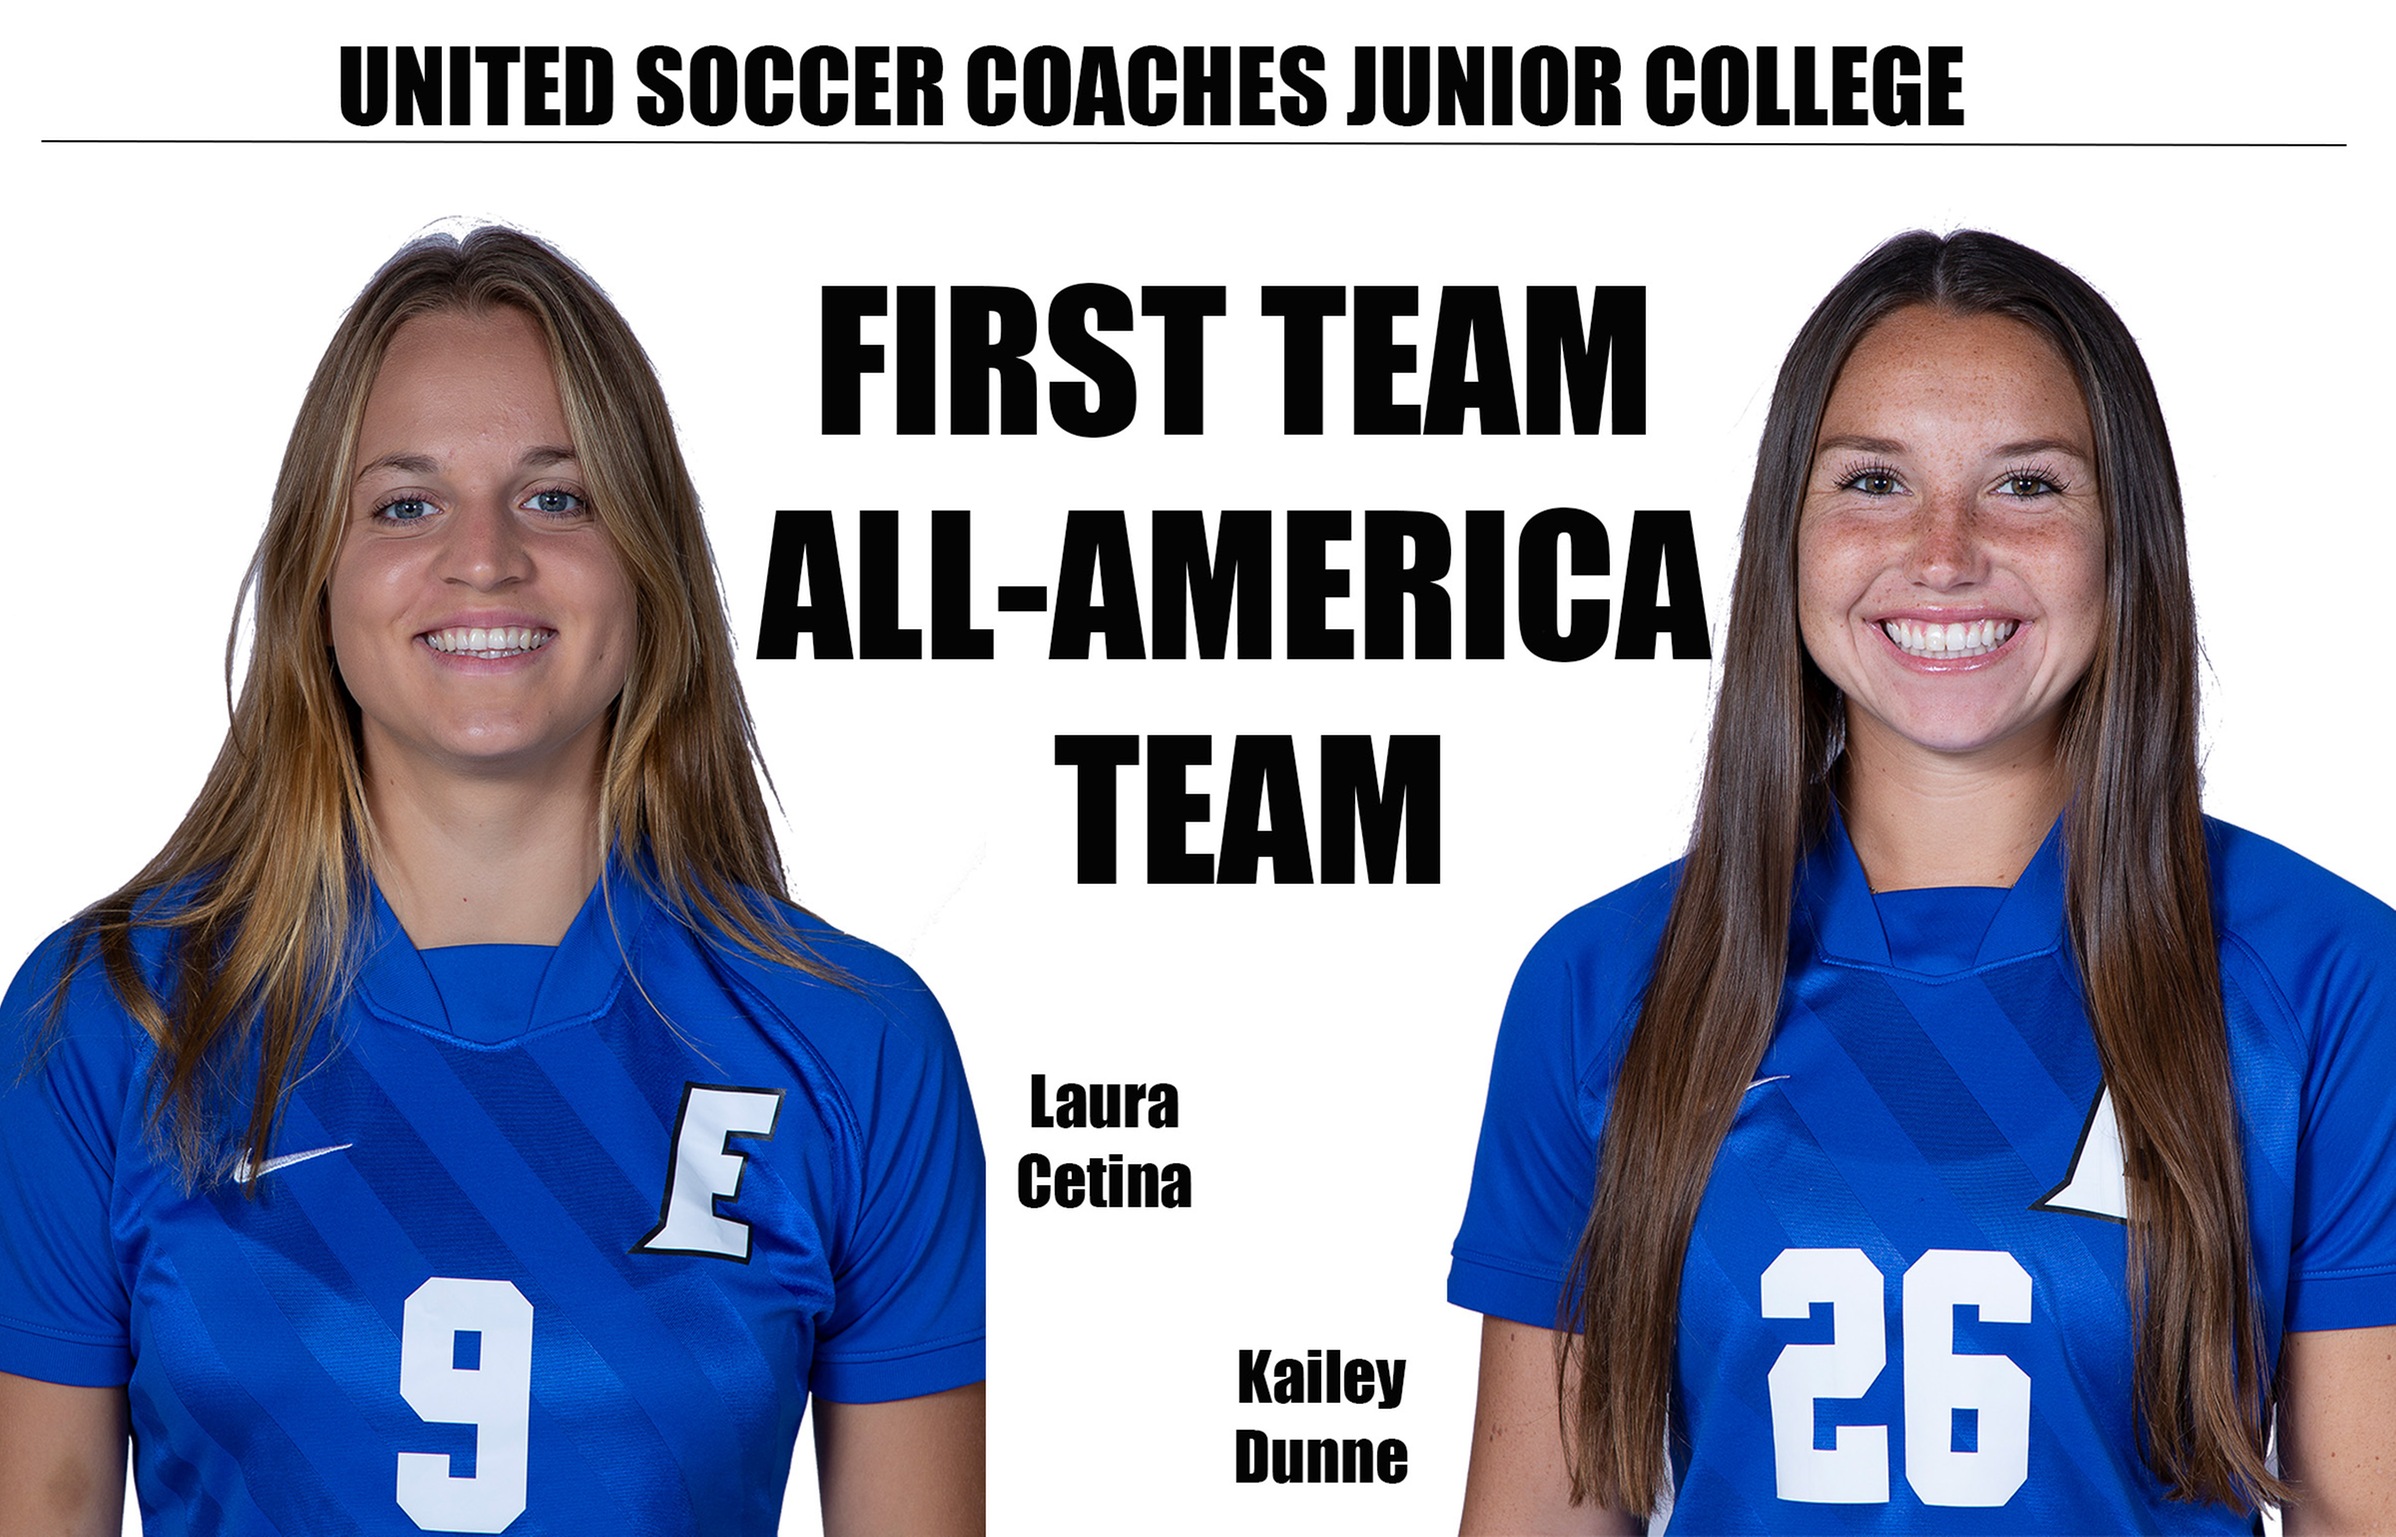 Cetina, Dunne named to United Soccer Coaches First Team All-America team